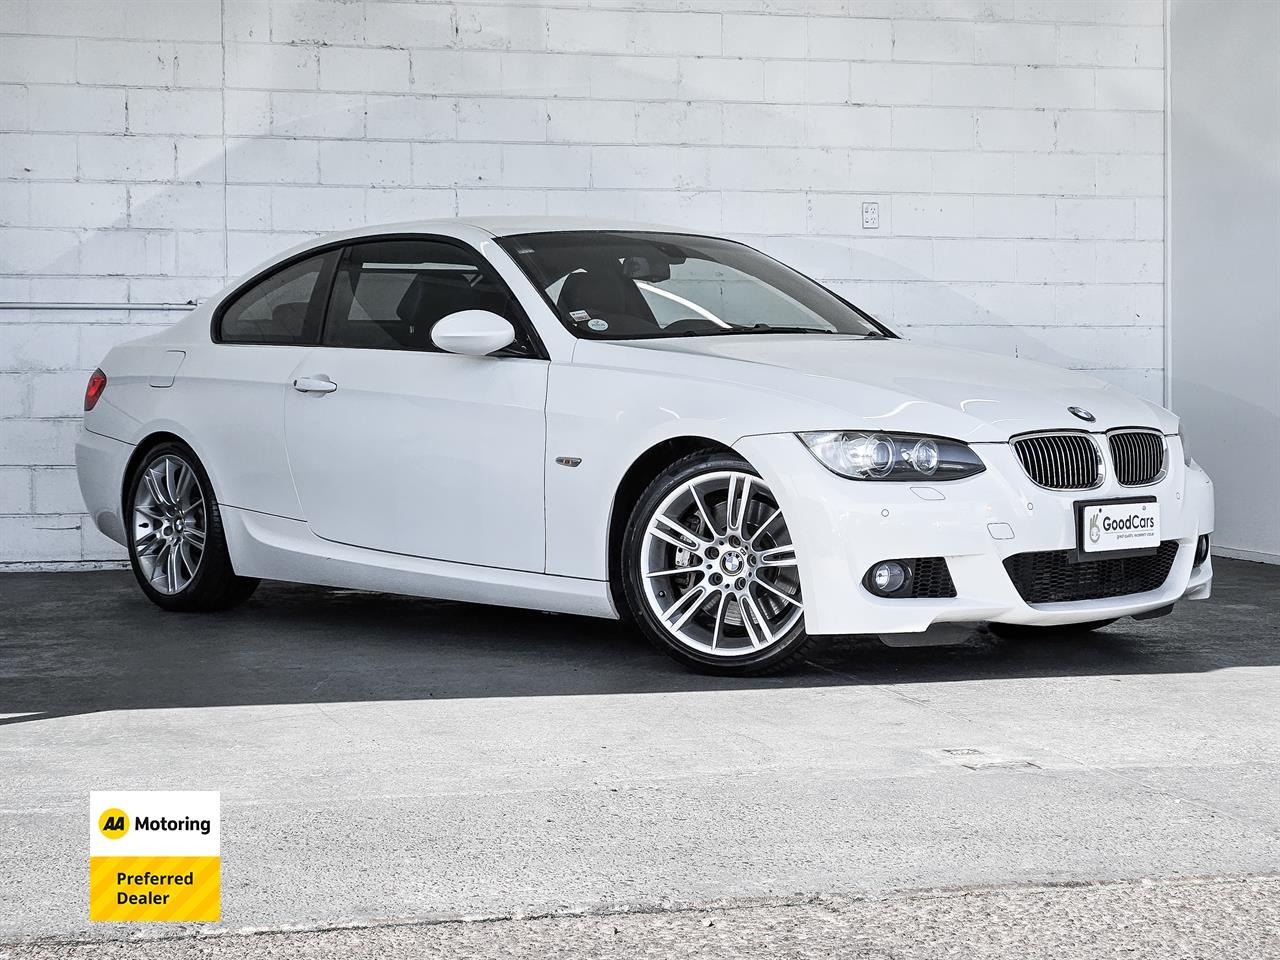 image-0, 2008 BMW 335i M Sport Coupe at Christchurch